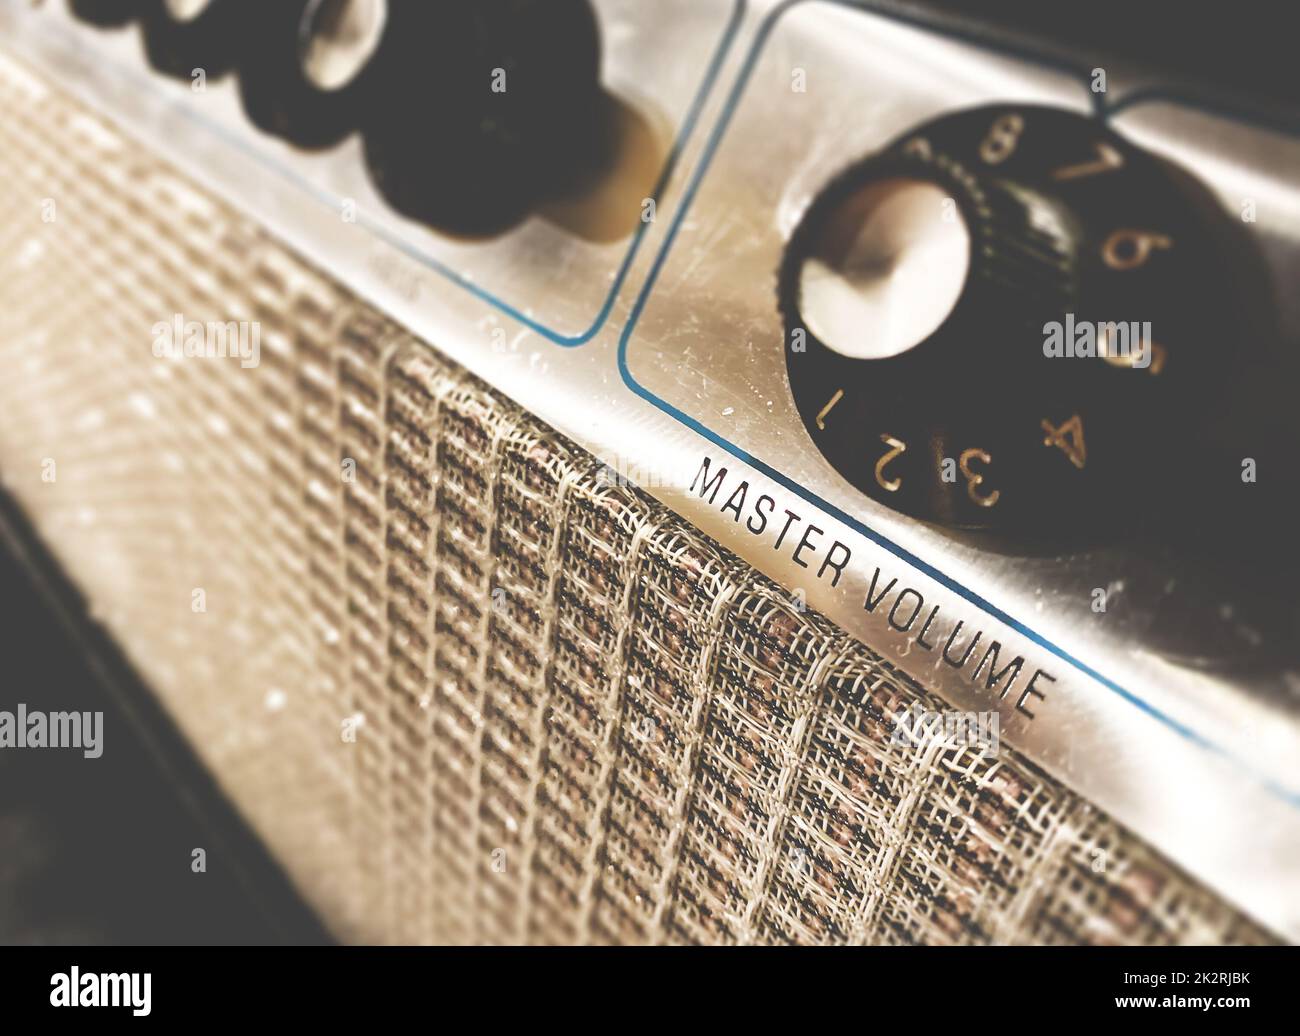 Close-up view of the knobs of an amplifier for adjusting the sound of stringed musical instruments Stock Photo